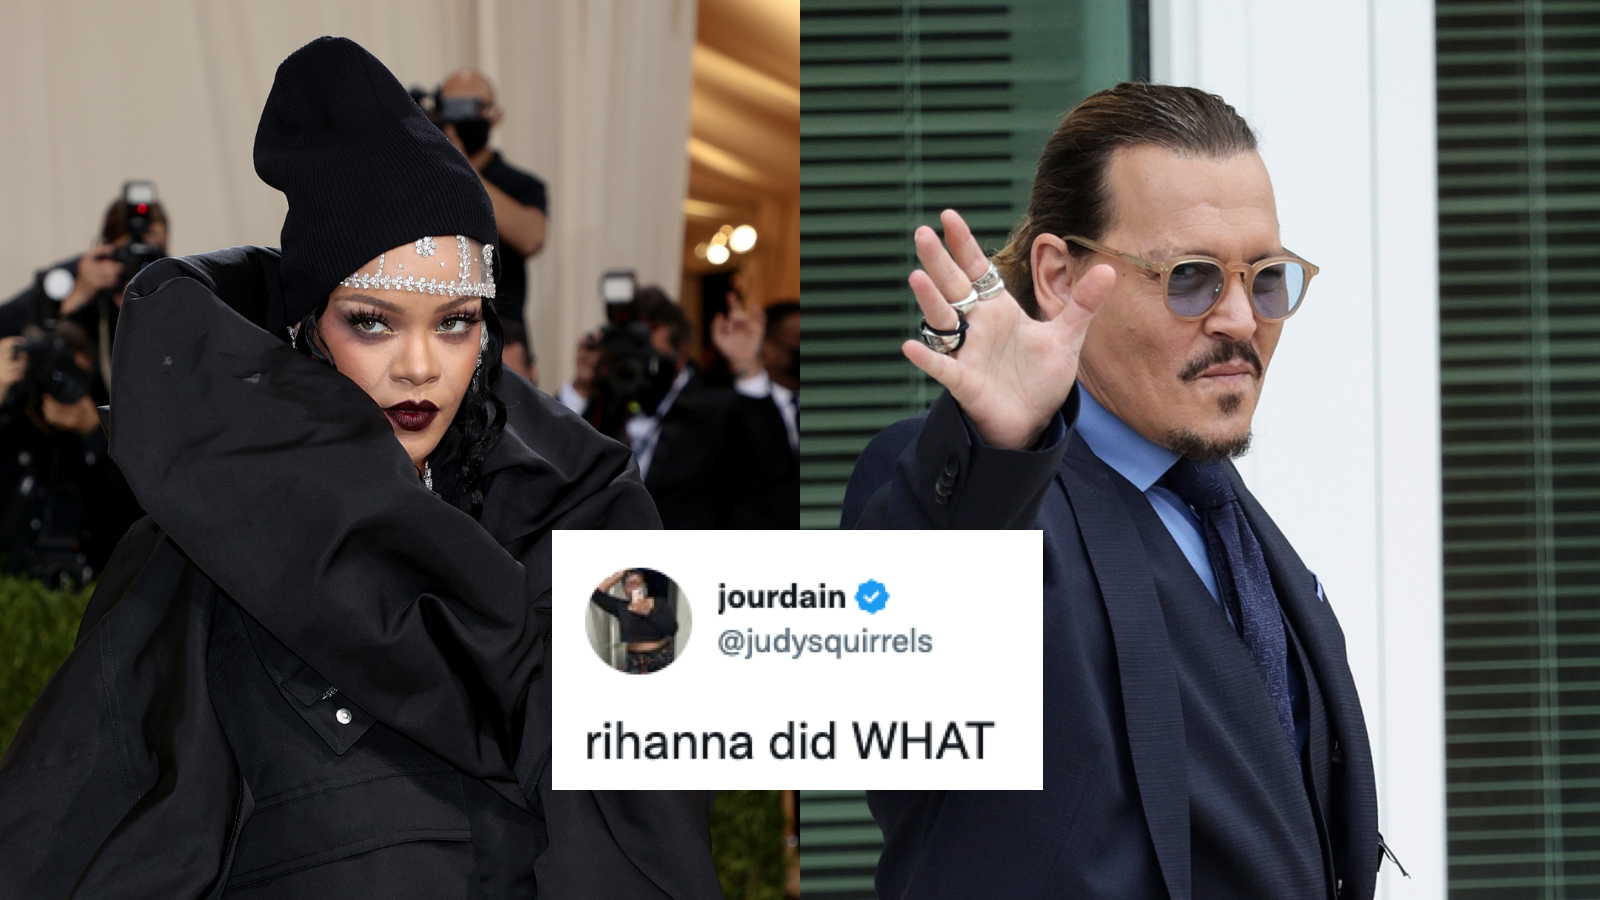 After 6 years of absence, Rihanna fans are already turning on her following Johnny Depp debacle